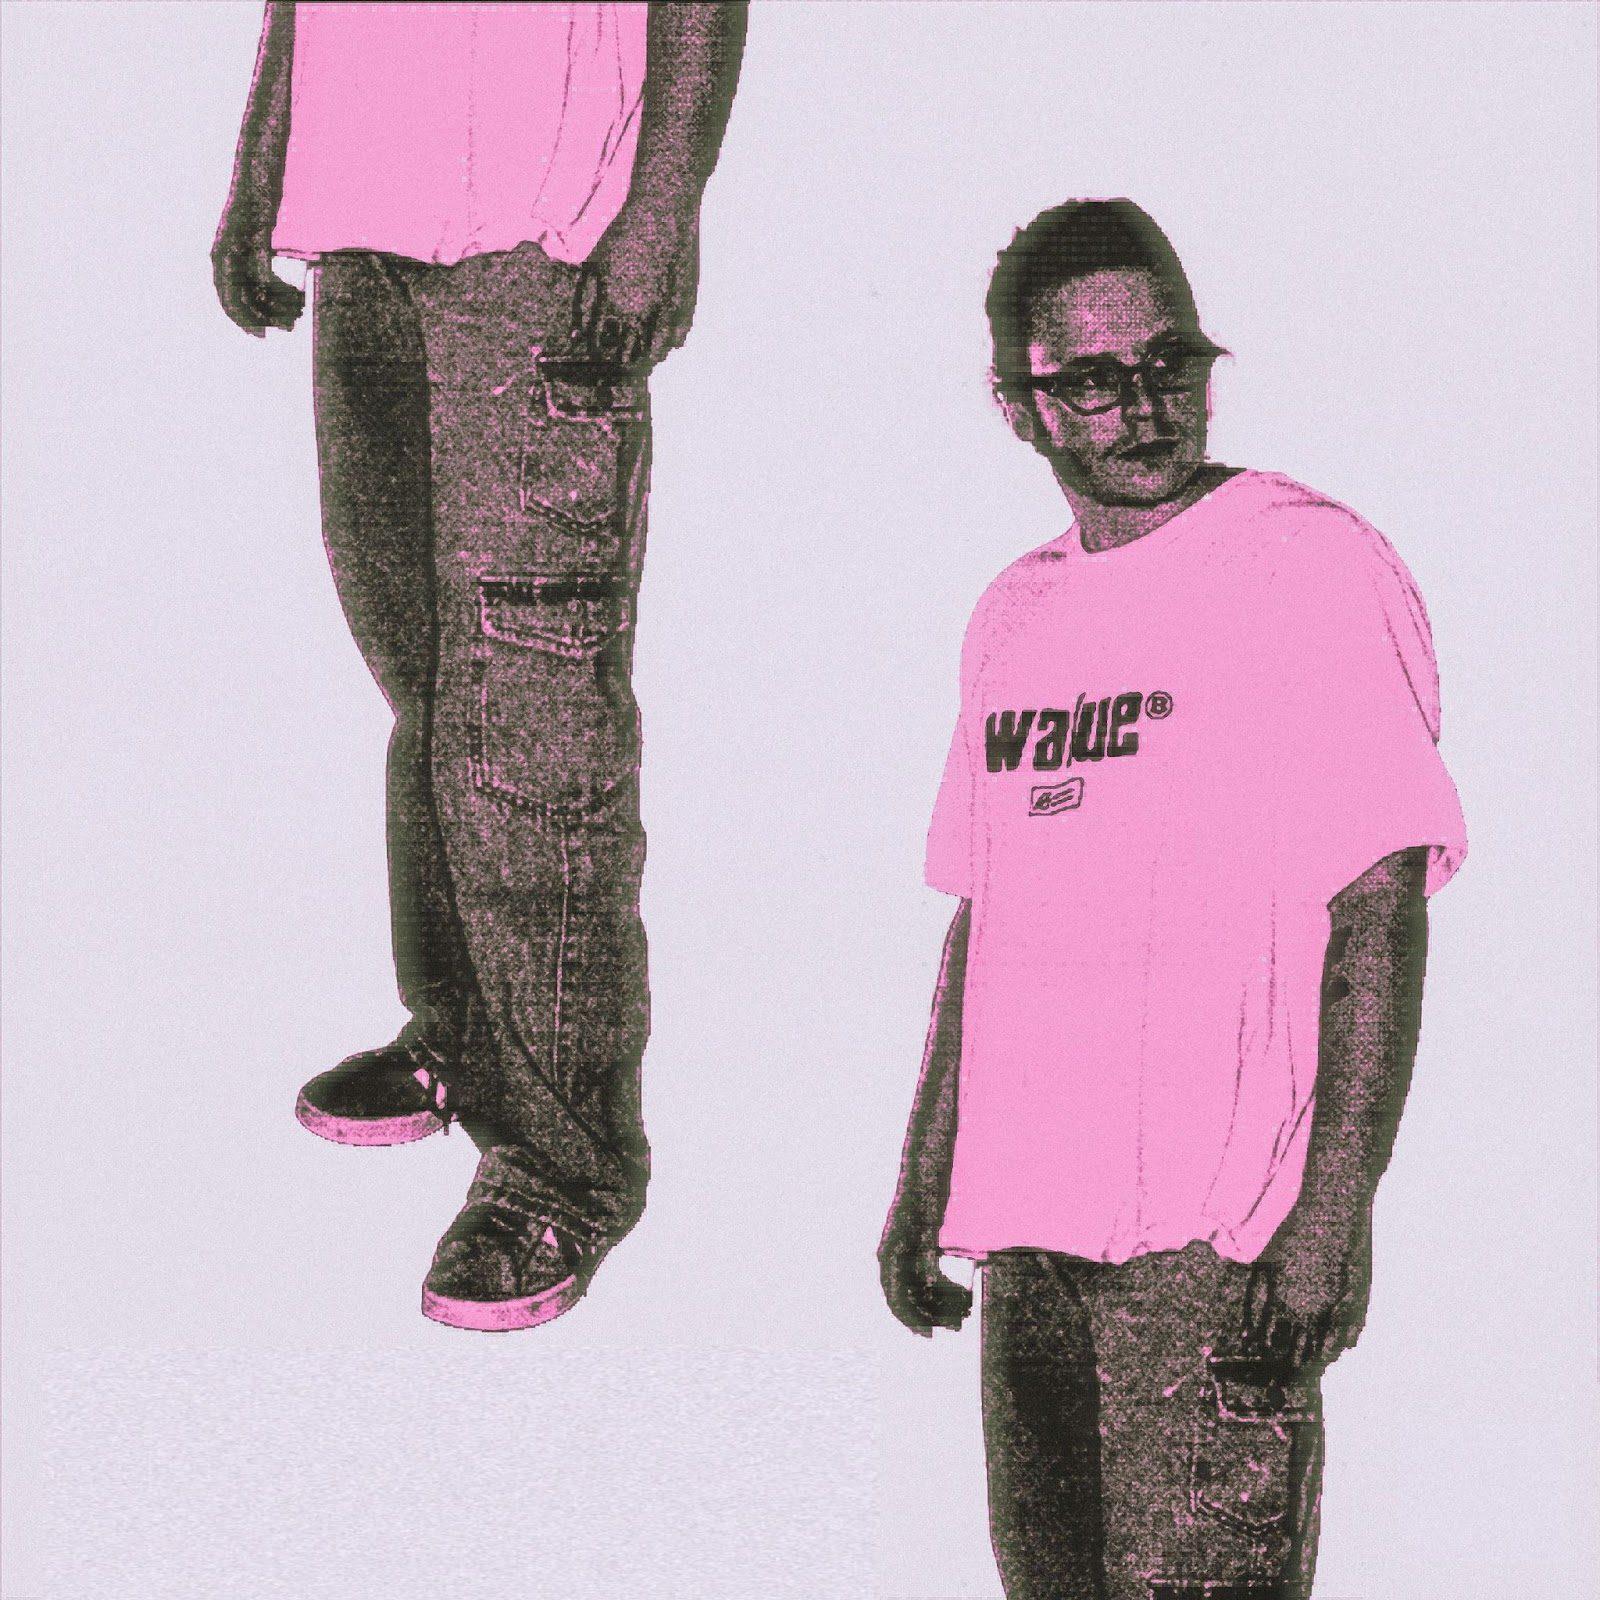 man standing in front of a white wall wearing a pink t-shirt